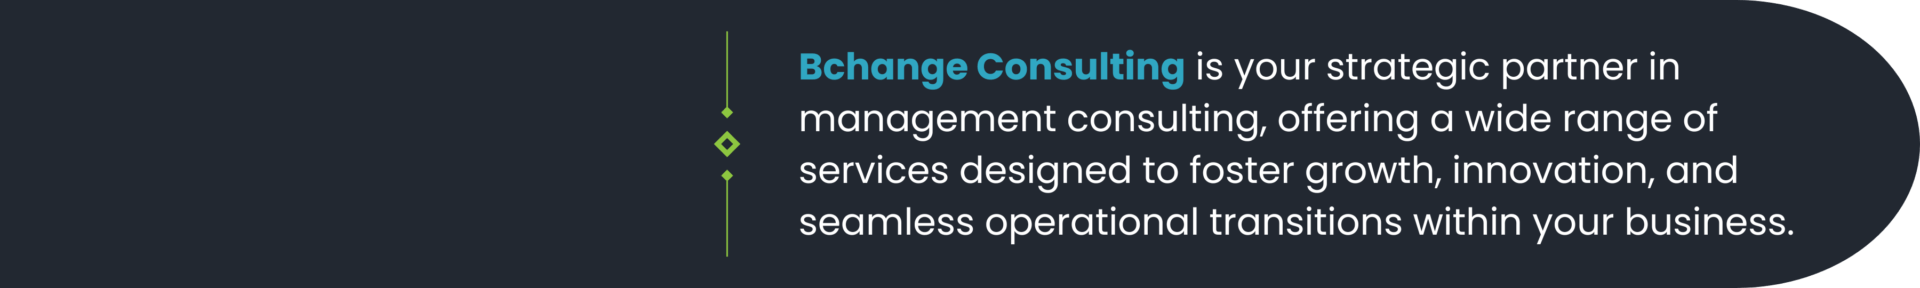 BCHANGE CONSULTING SERVICES BUTTON